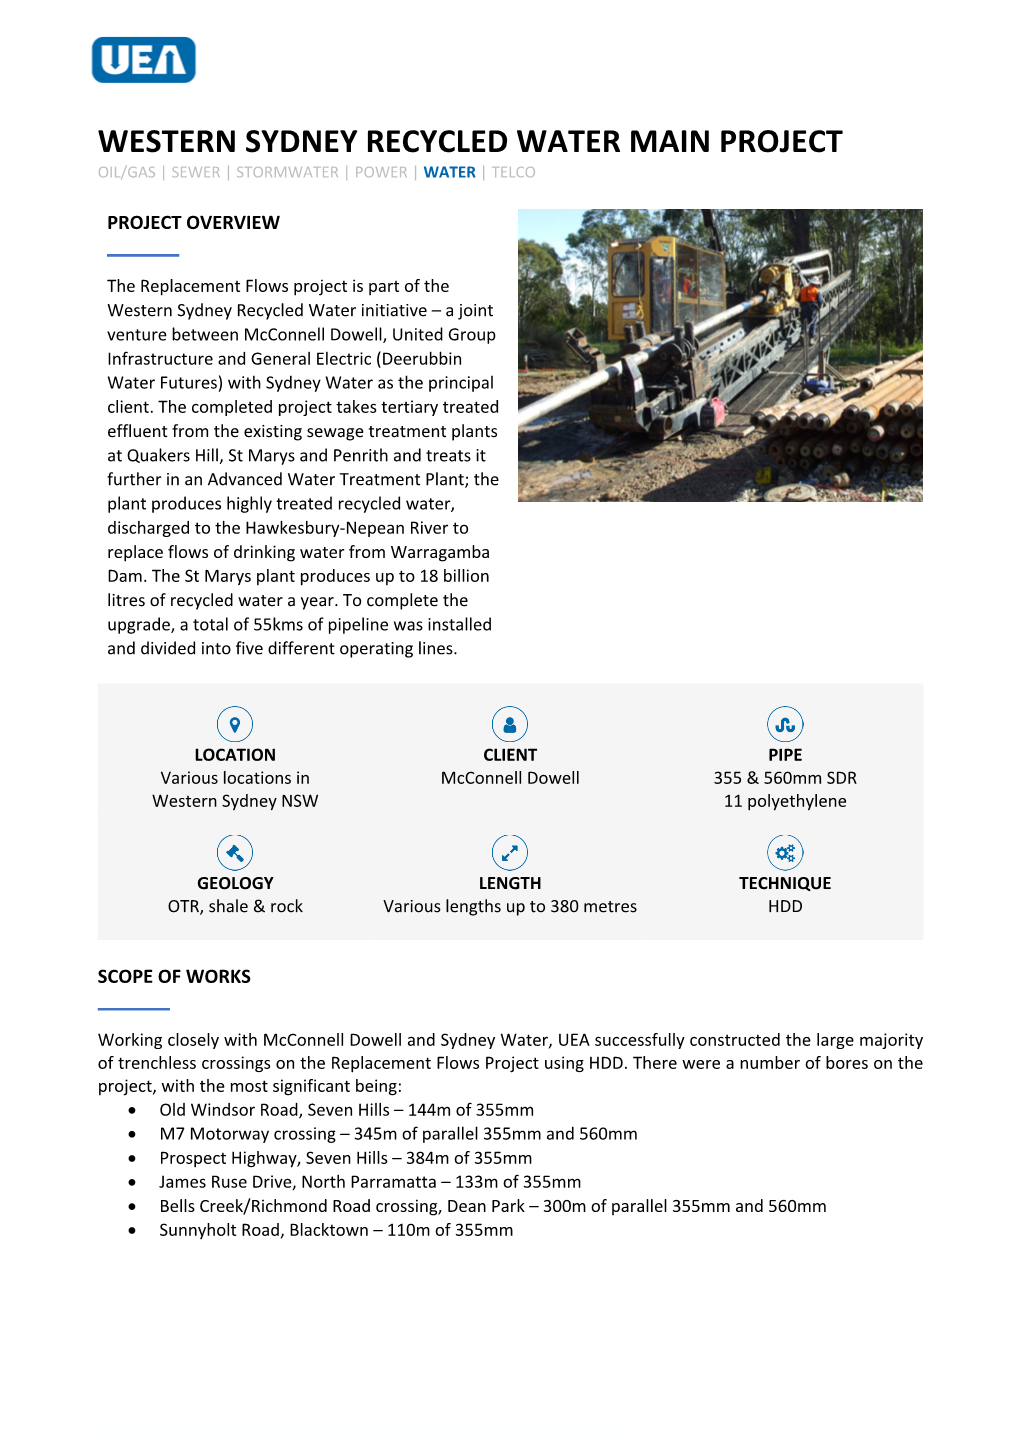 Western Sydney Recycled Water Main Project Oil/Gas | Sewer | Stormwater | Power | Water | Telco